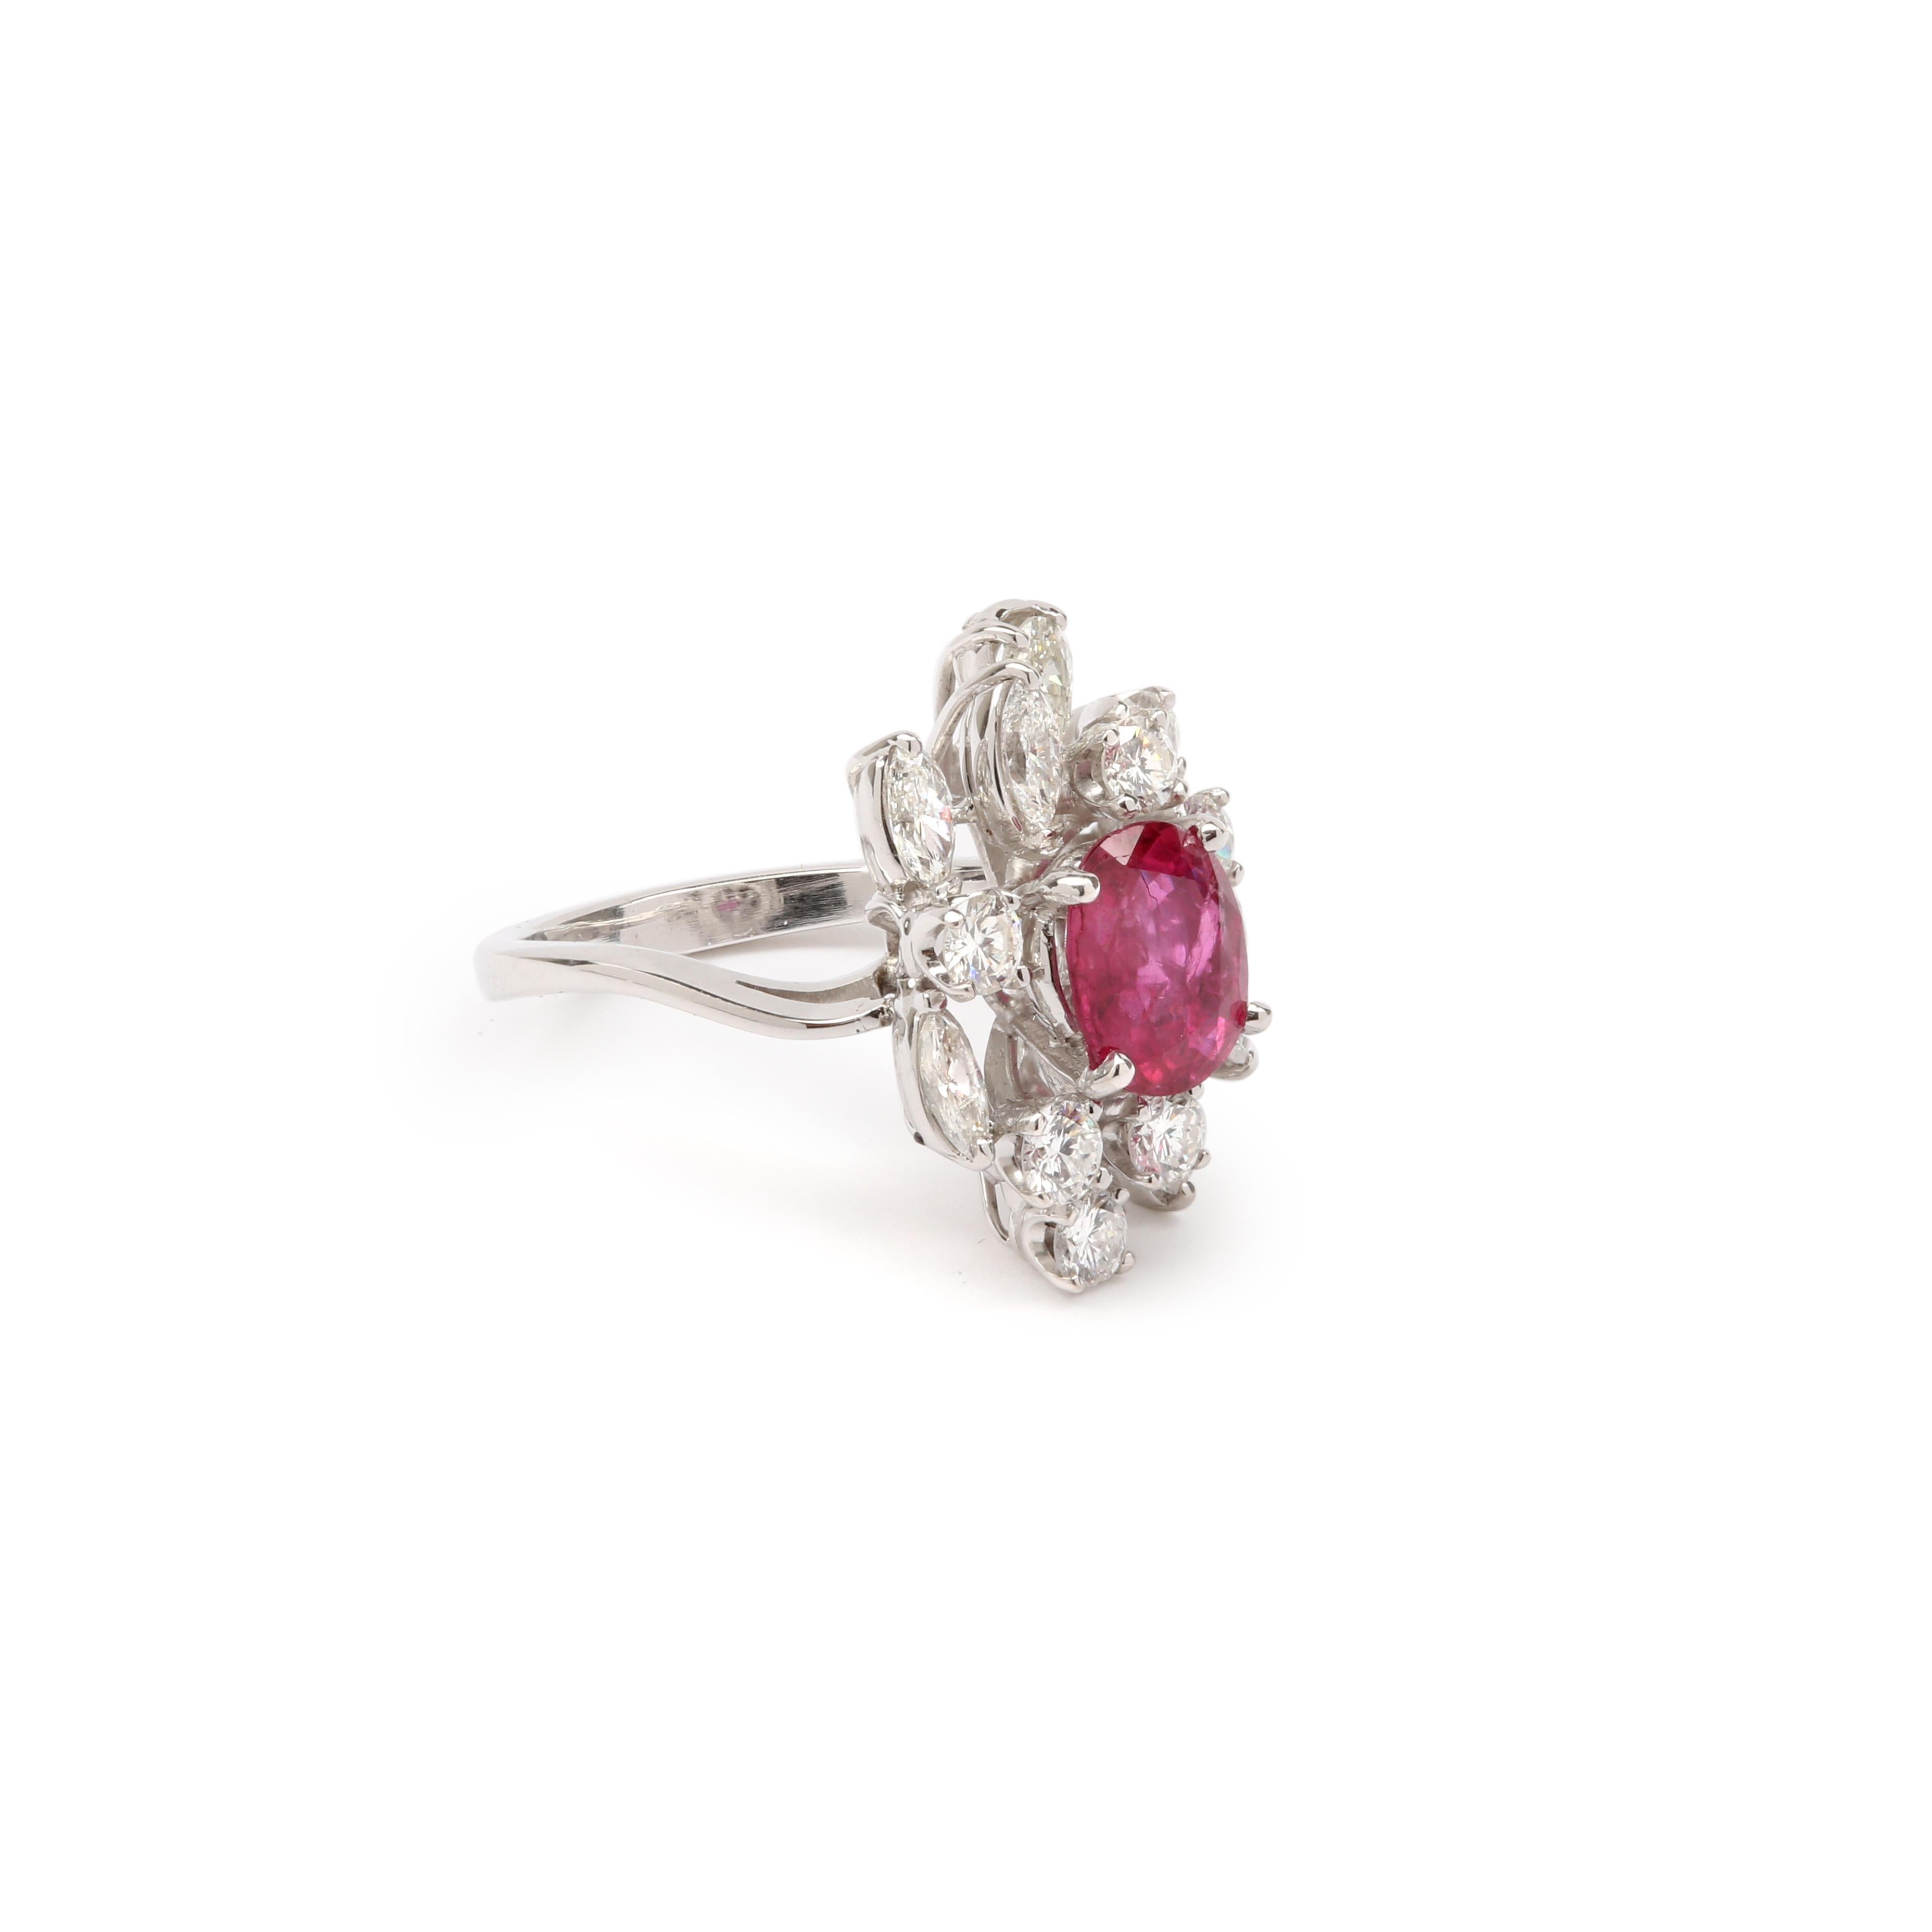 Magnificent ring set with a Thai ruby in a setting of brilliant and navette diamonds.

Estimated weight of the ruby : 1.75 carats

With Carat Gem Lab certificate, specifying natural ruby, intense red, origin Thailand.

Natural stones may have some